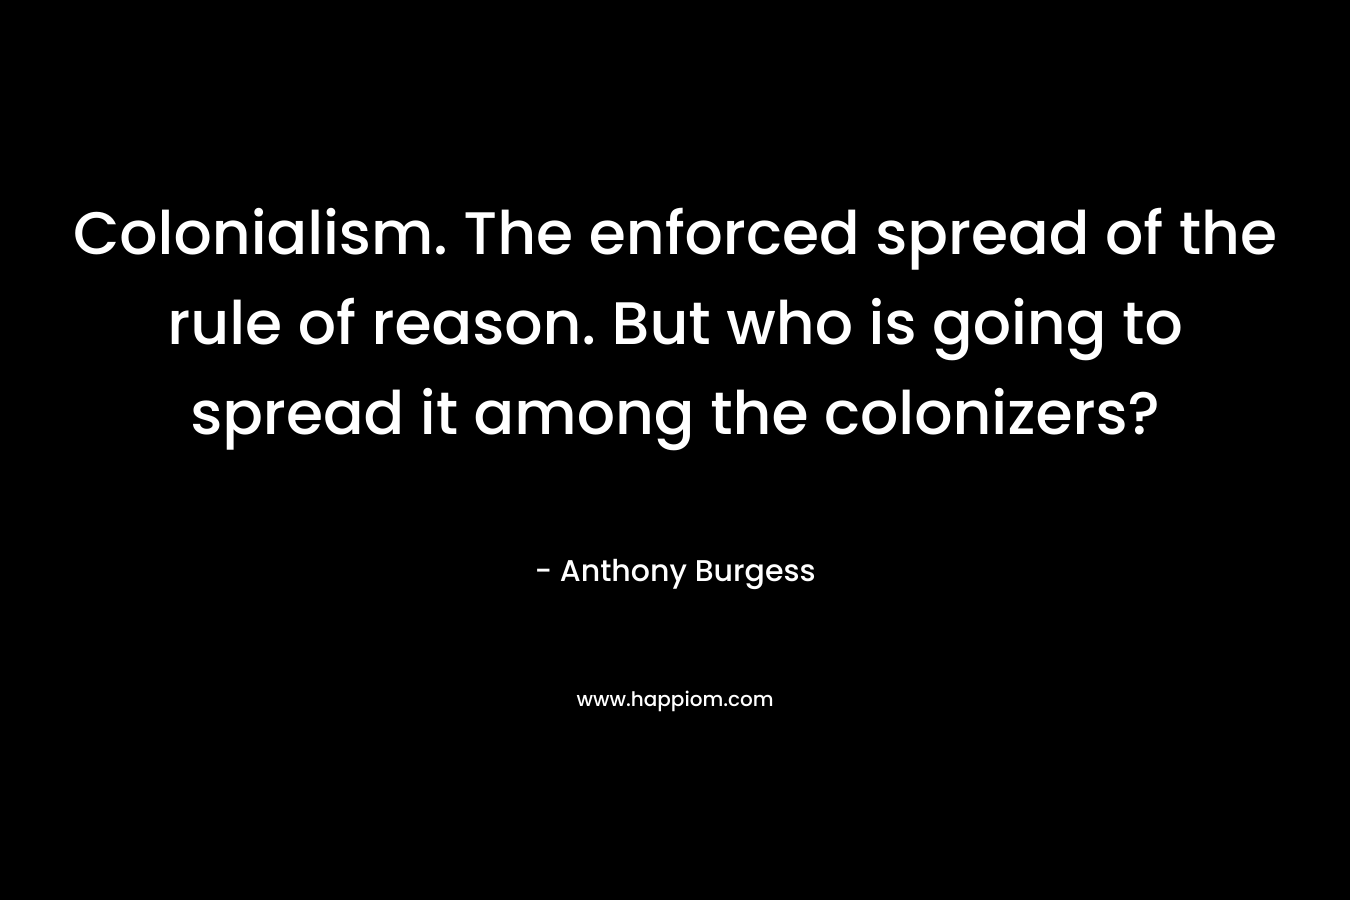 Colonialism. The enforced spread of the rule of reason. But who is going to spread it among the colonizers?